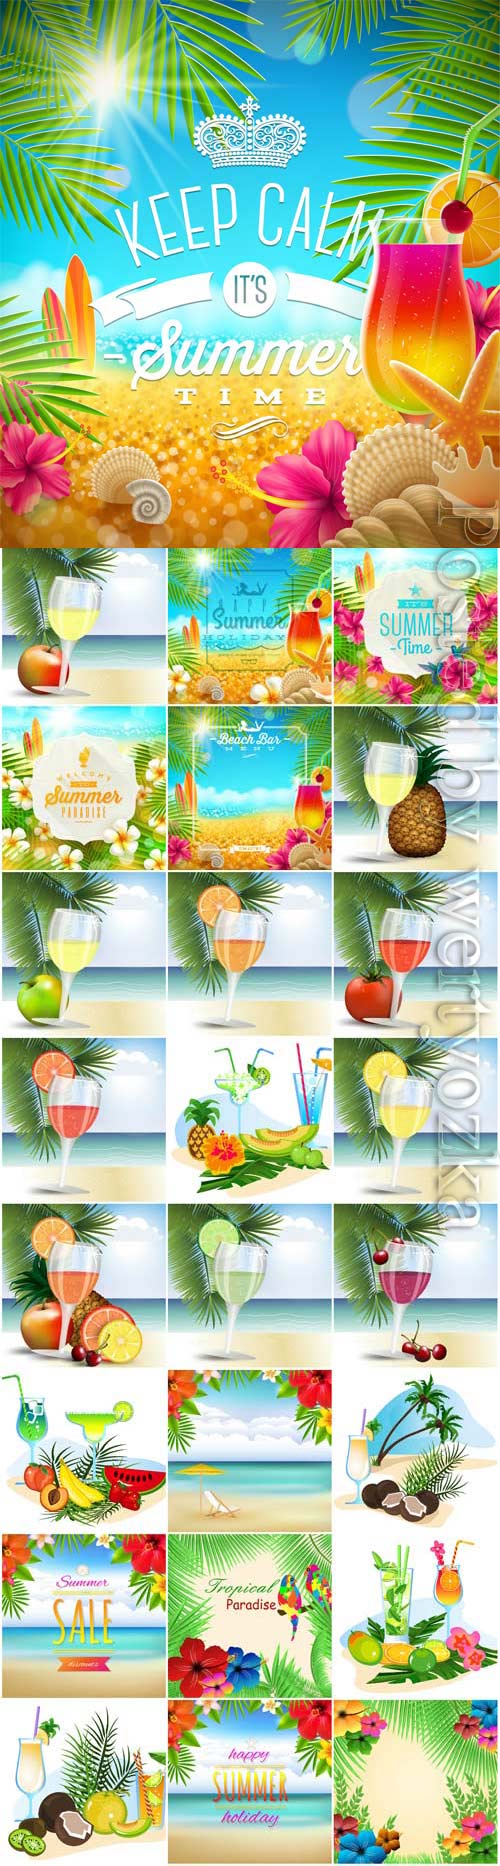 Summer vacation, sea, palm trees, cocktails in vector vol 21